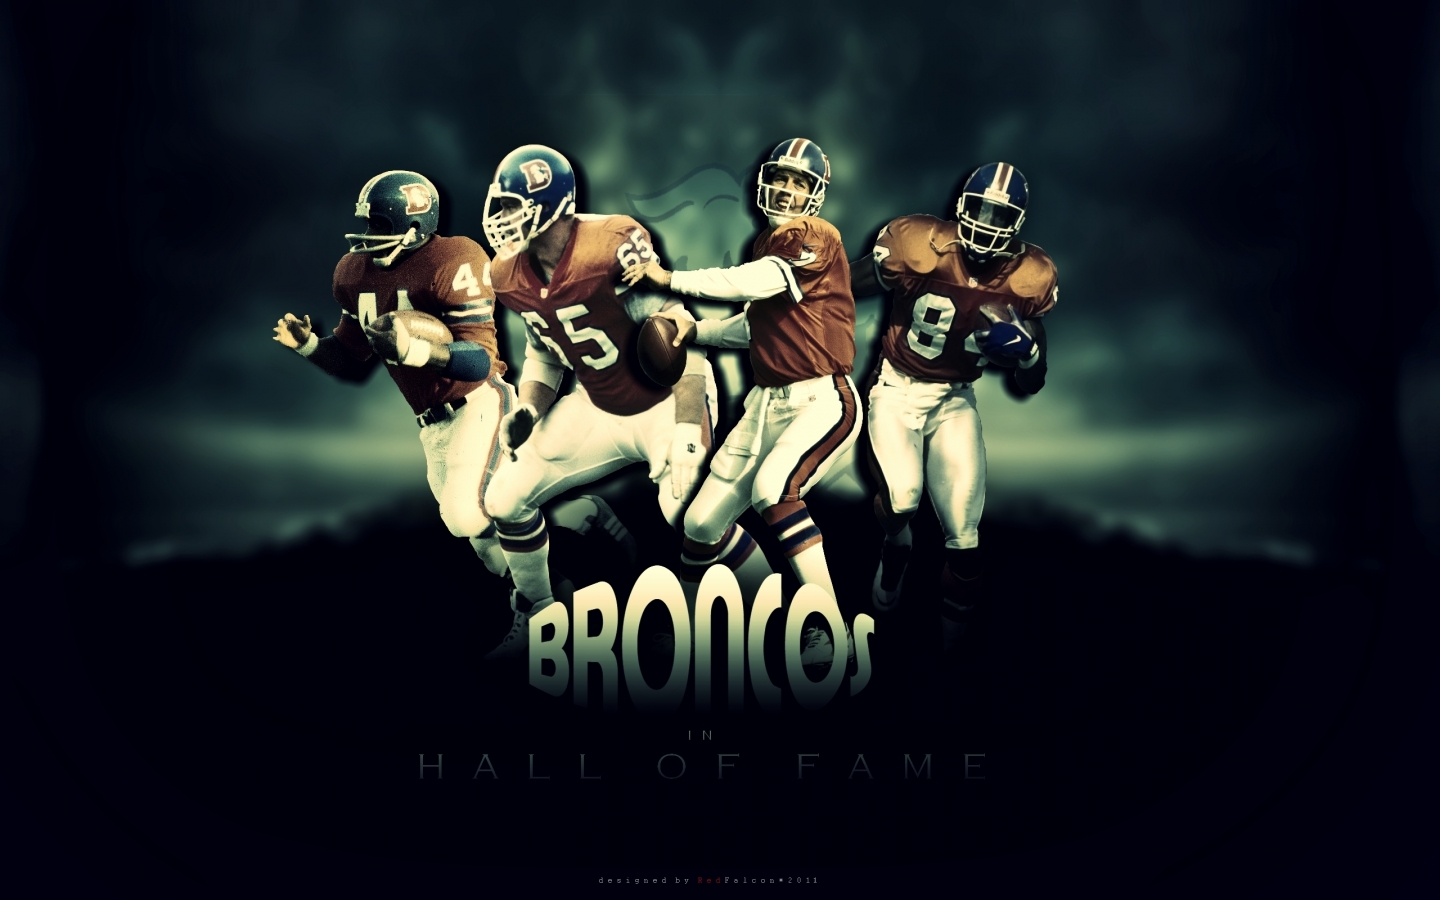 Broncos Hall of Fame for 1440 x 900 widescreen resolution